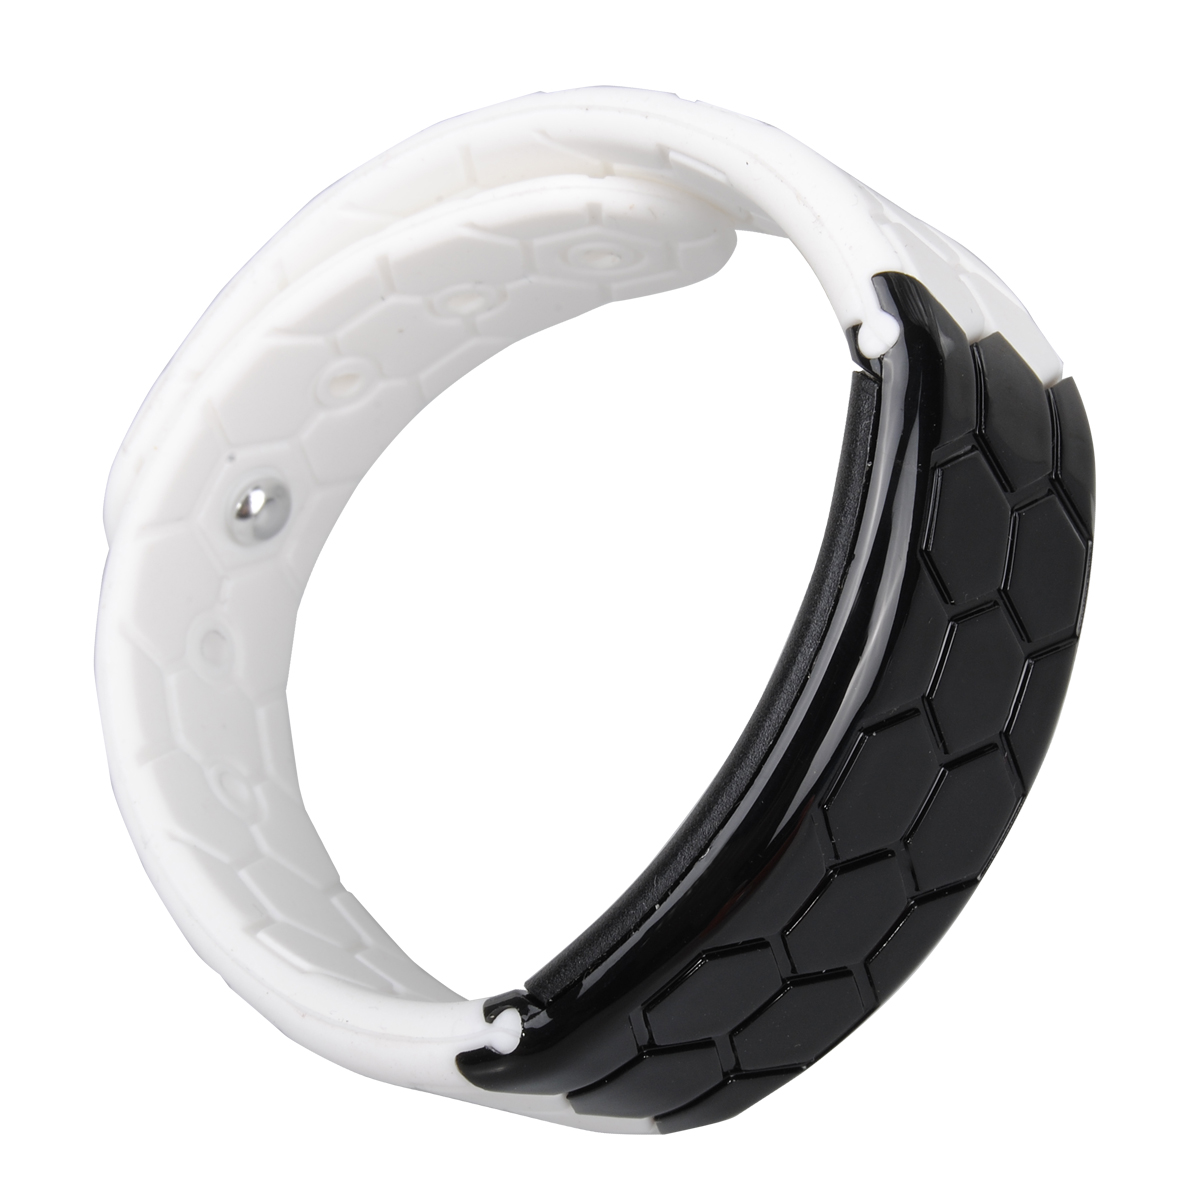 Find F1 IP67 Waterproof 30 Days Long Standby Sleep Monitor Smart Wristband for Sale on Gipsybee.com with cryptocurrencies